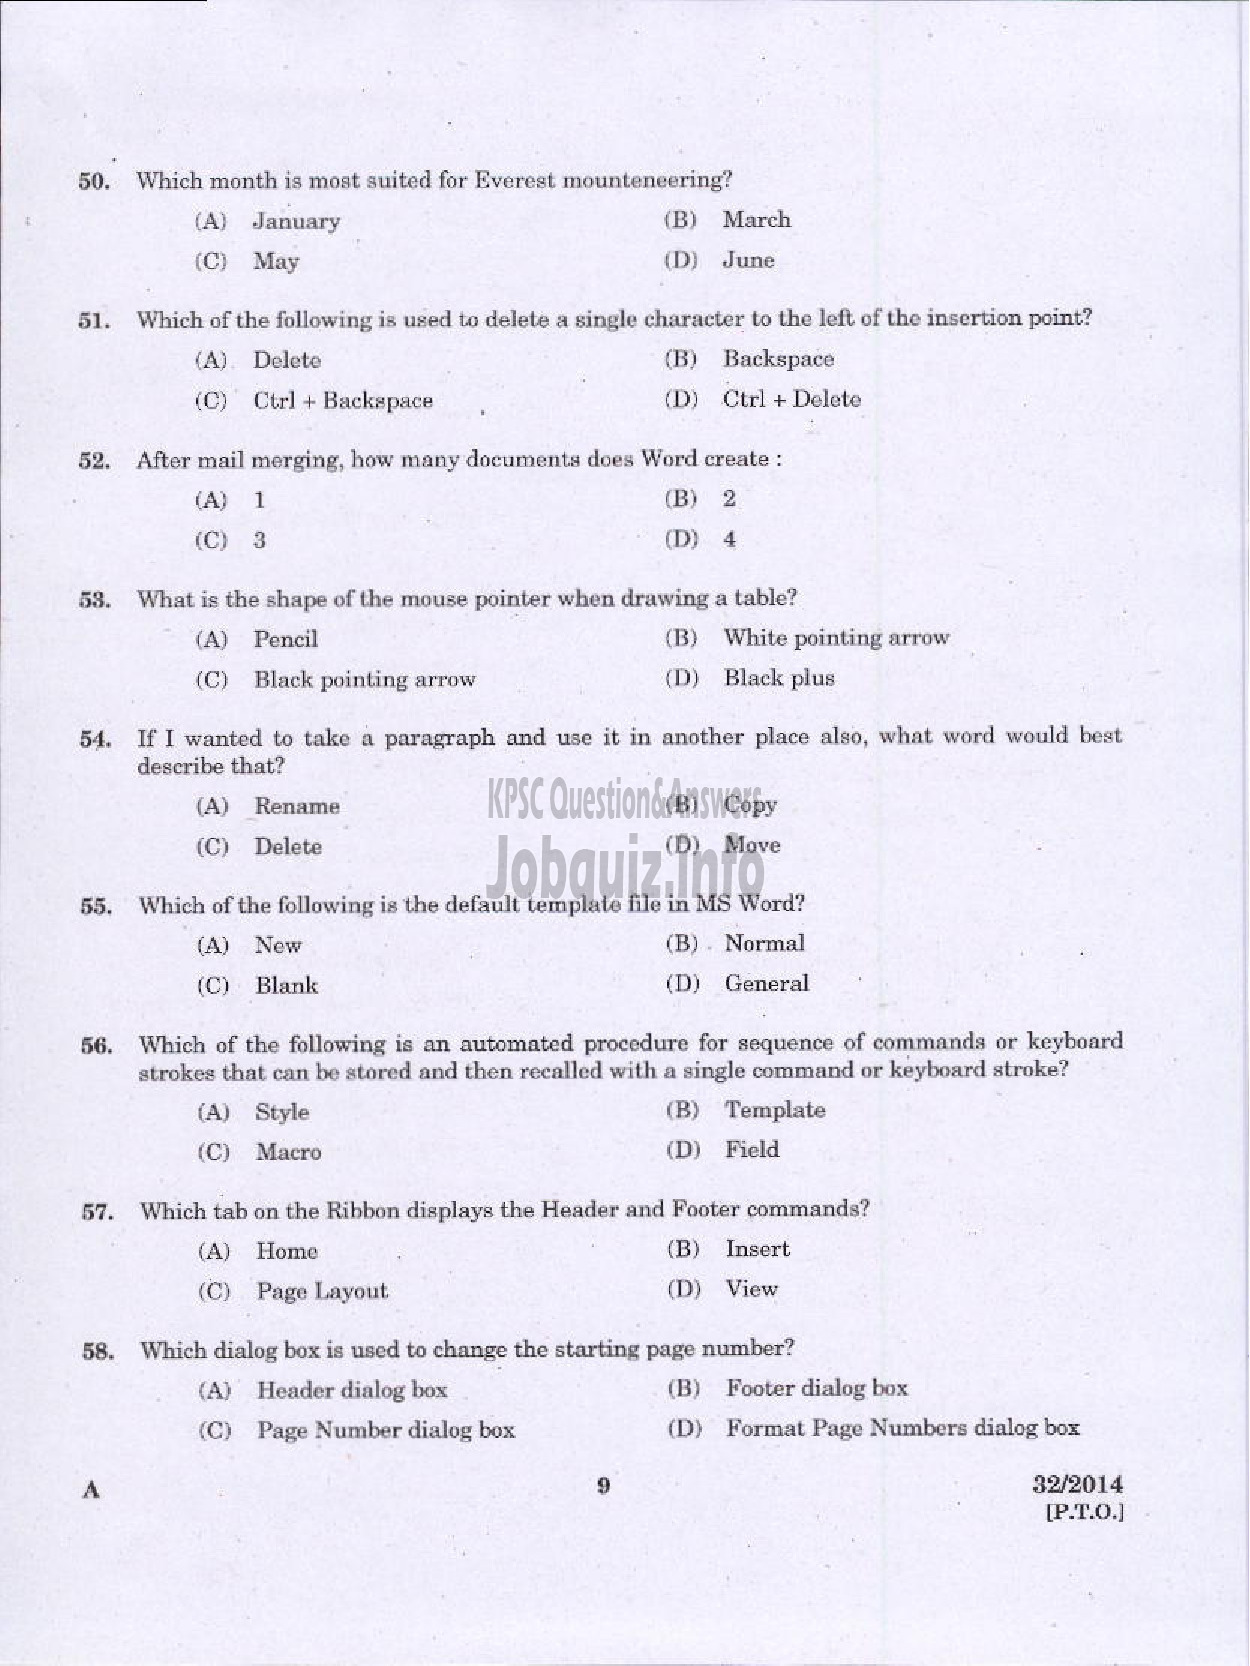 Kerala PSC Question Paper - LOWER DIVISION TYPIST NCA VARIOUS GOVERNMENT OWNED COMPANIES IDKY-7